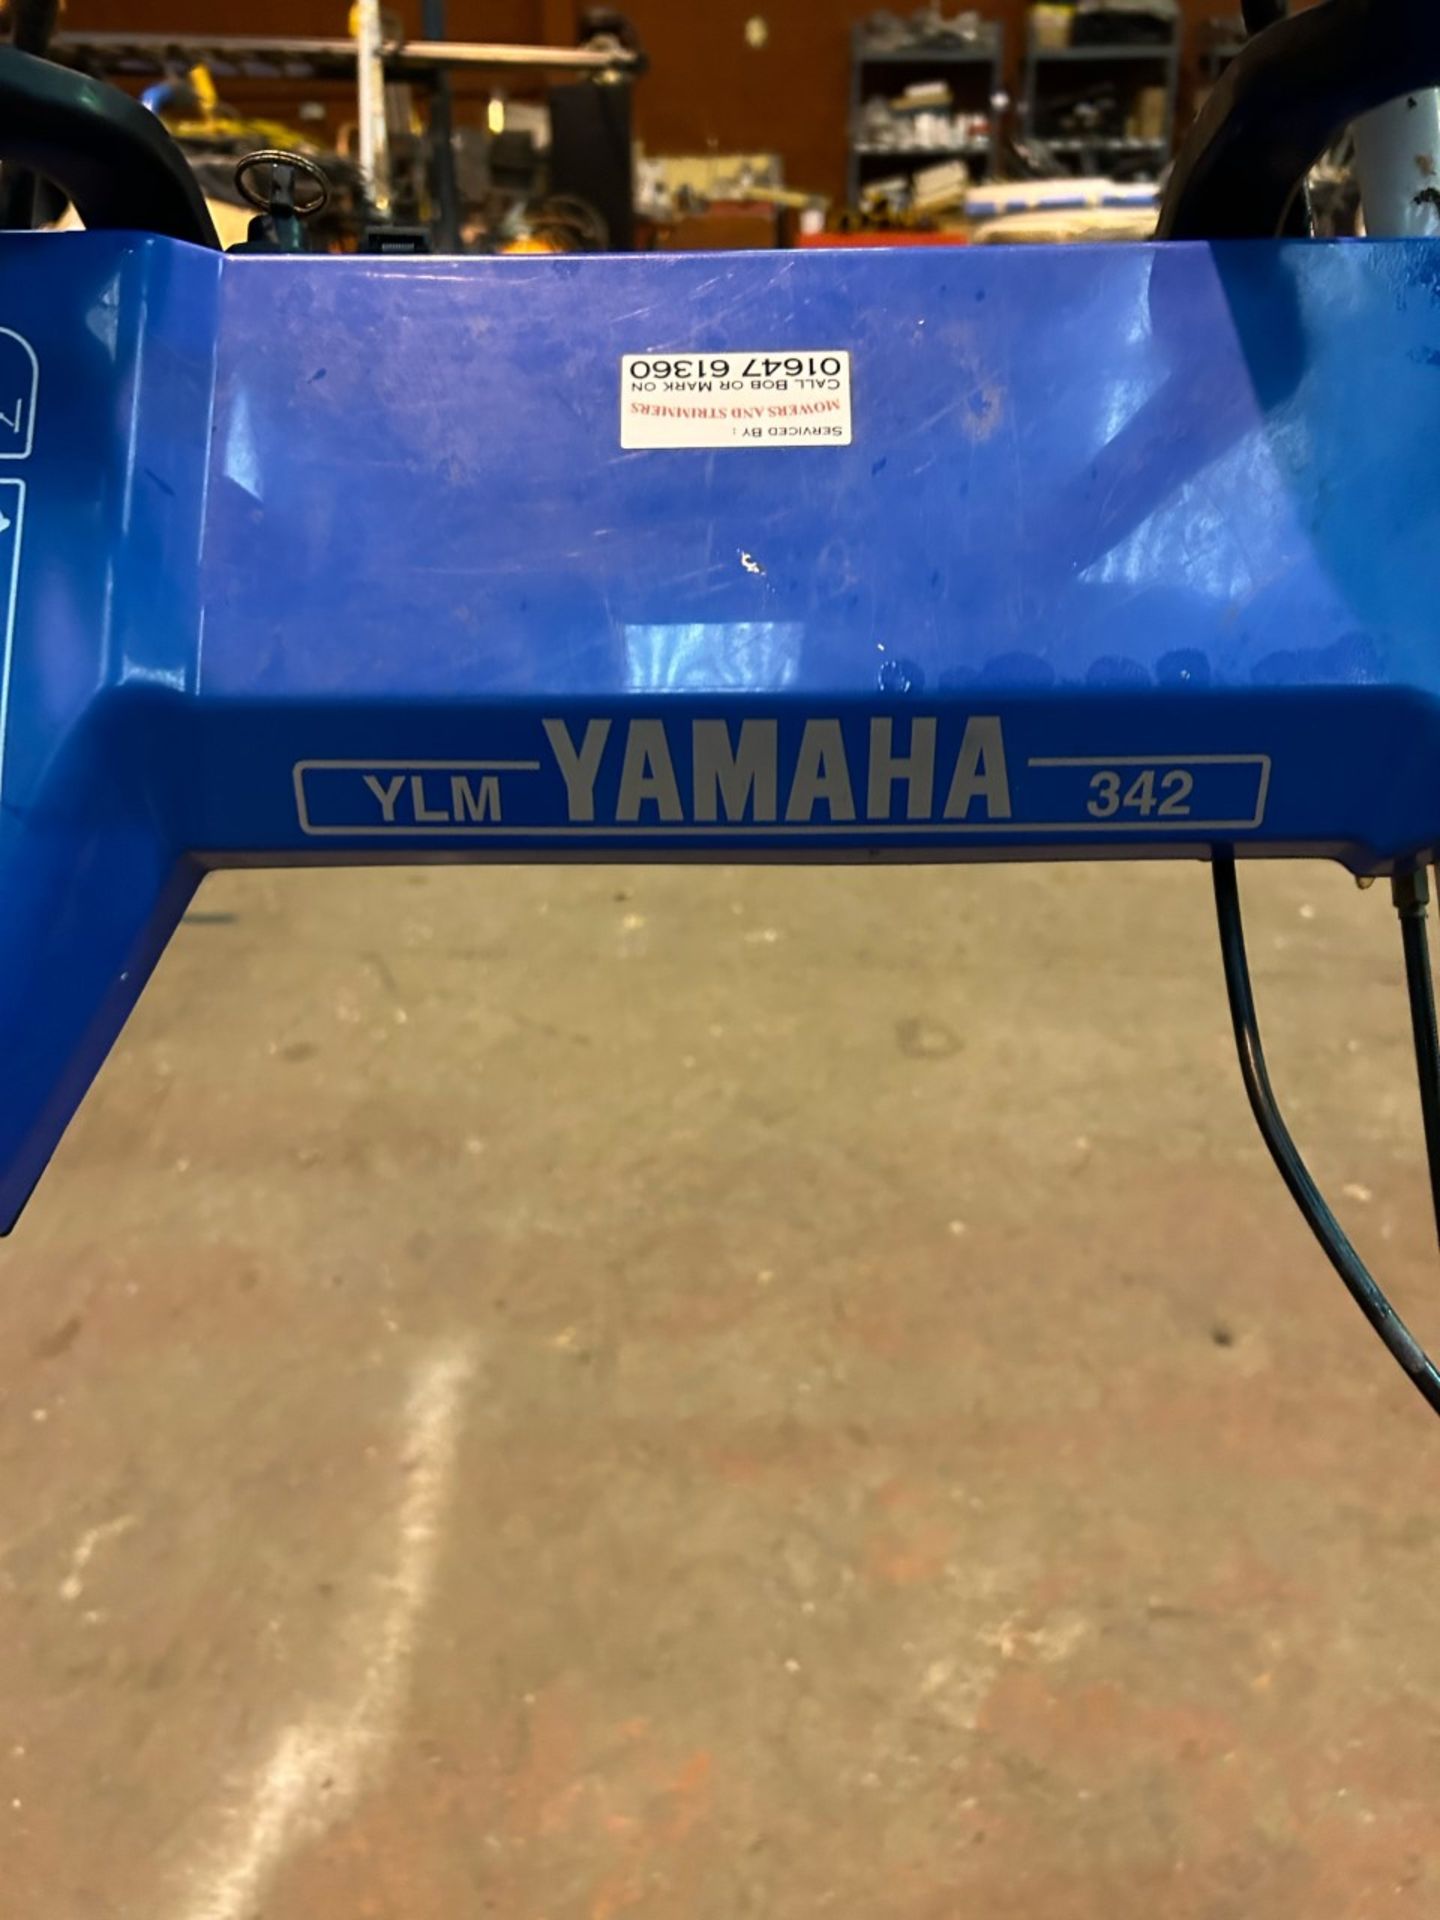 Yamaha YLM 342 self propelled lawn mower with roller average condition. Needs service - Image 3 of 4